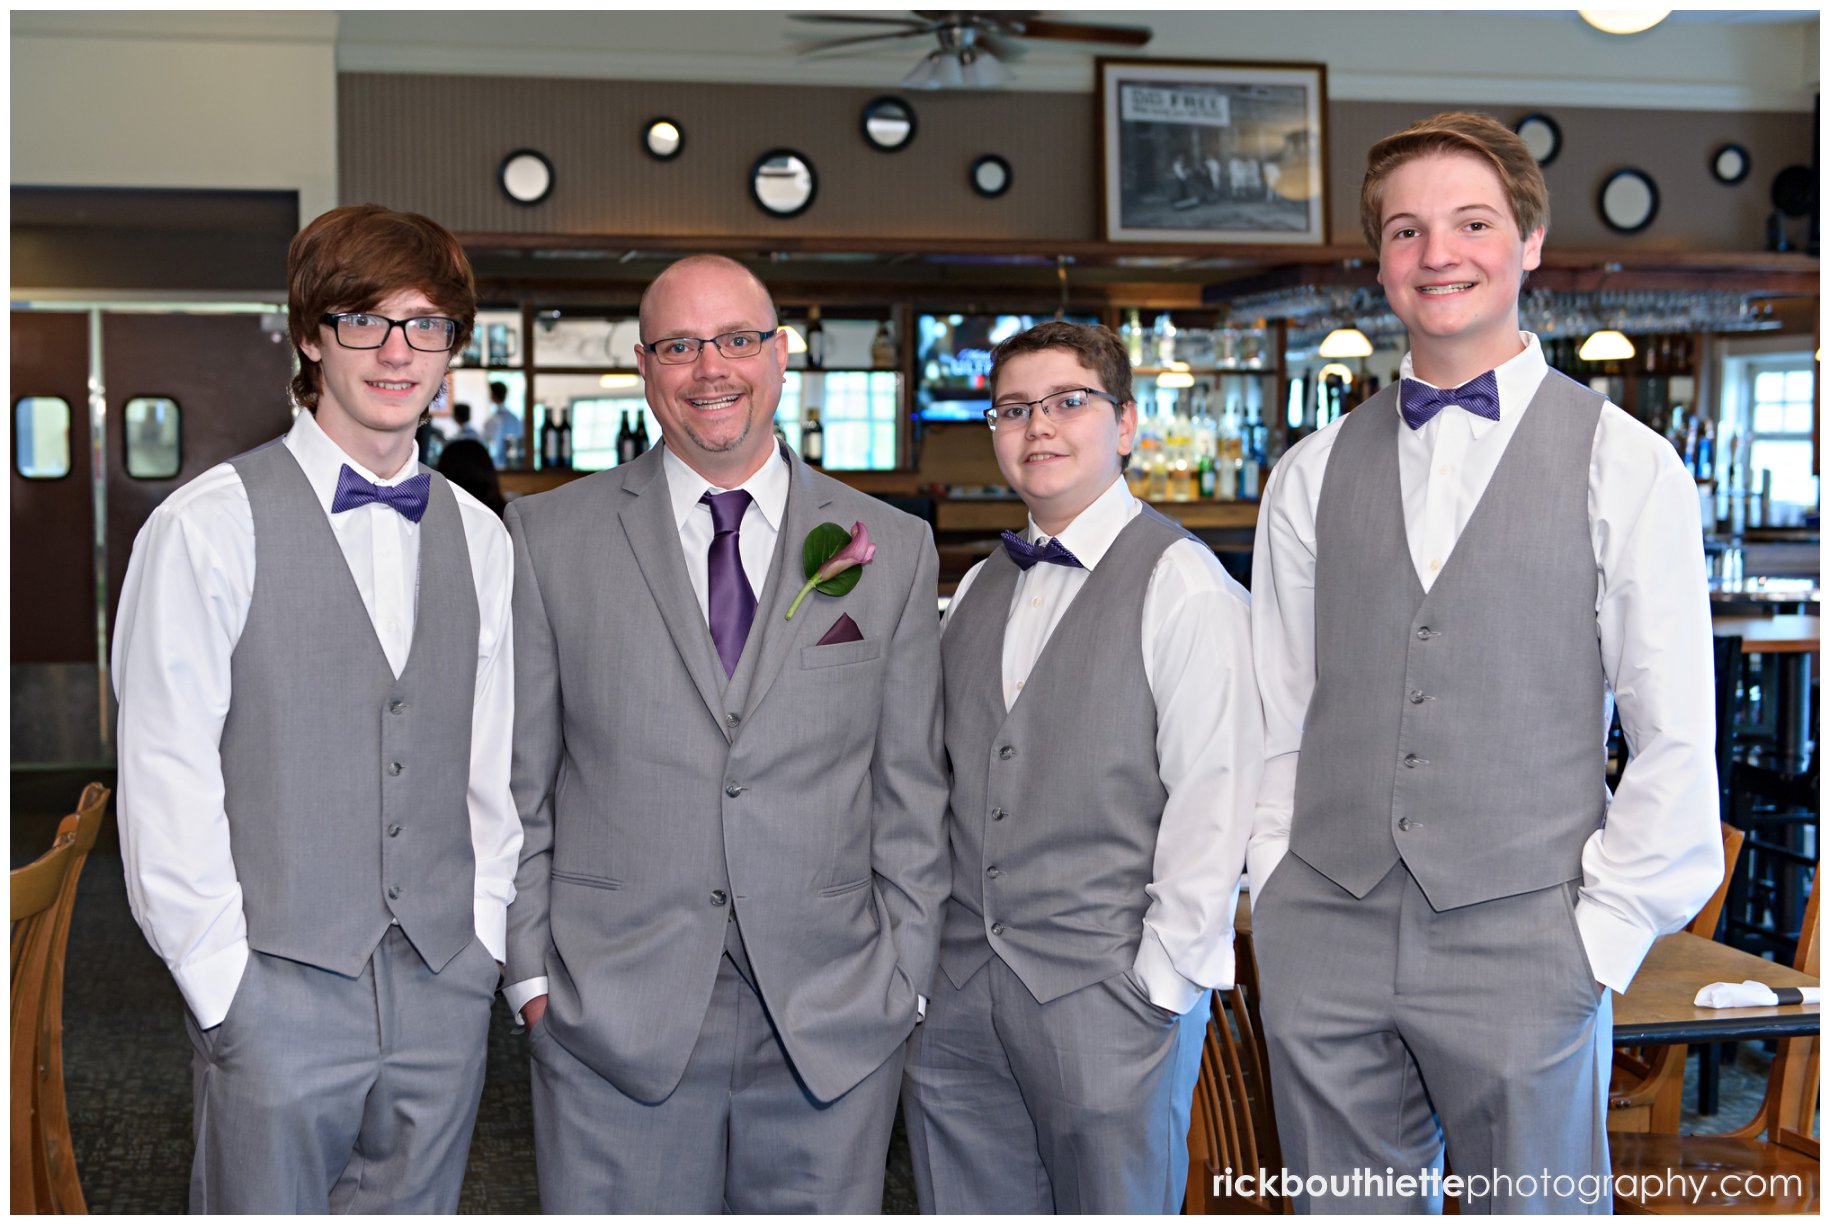 the groom and his groomsmen before his wedding at the Oaks Grandview Ballroom